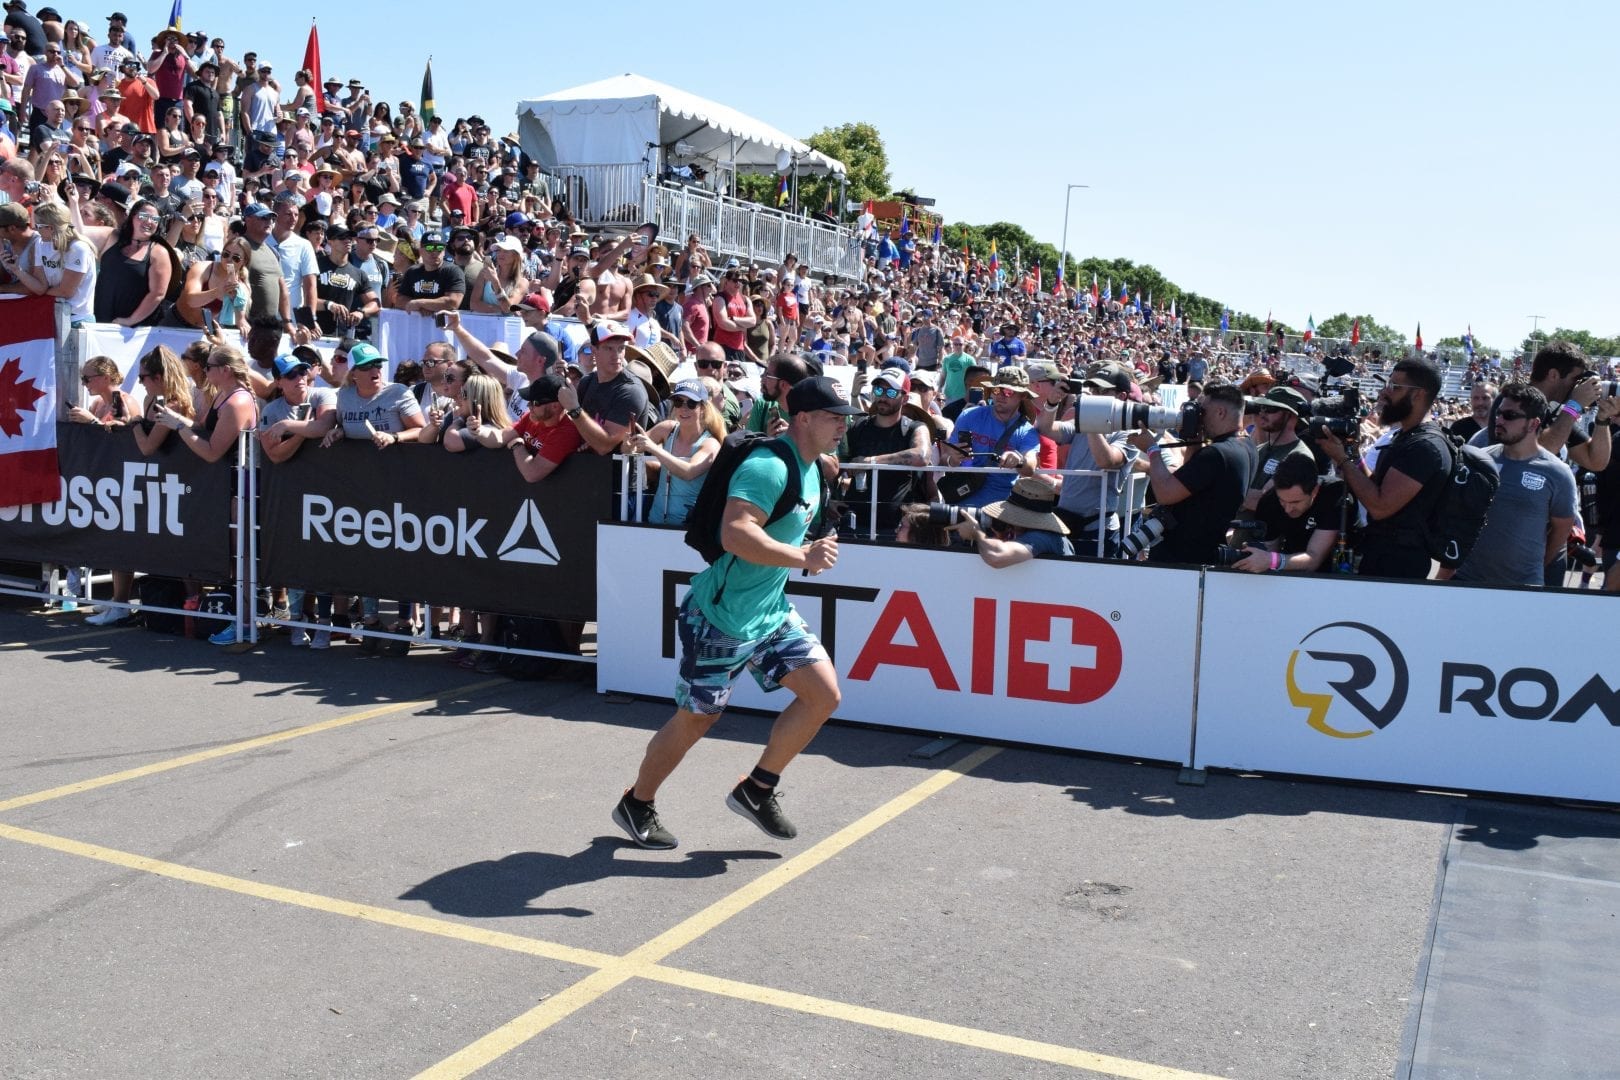 Adrian Mundwiler completes the Ruck Run event at the 2019 CrossFit Games.